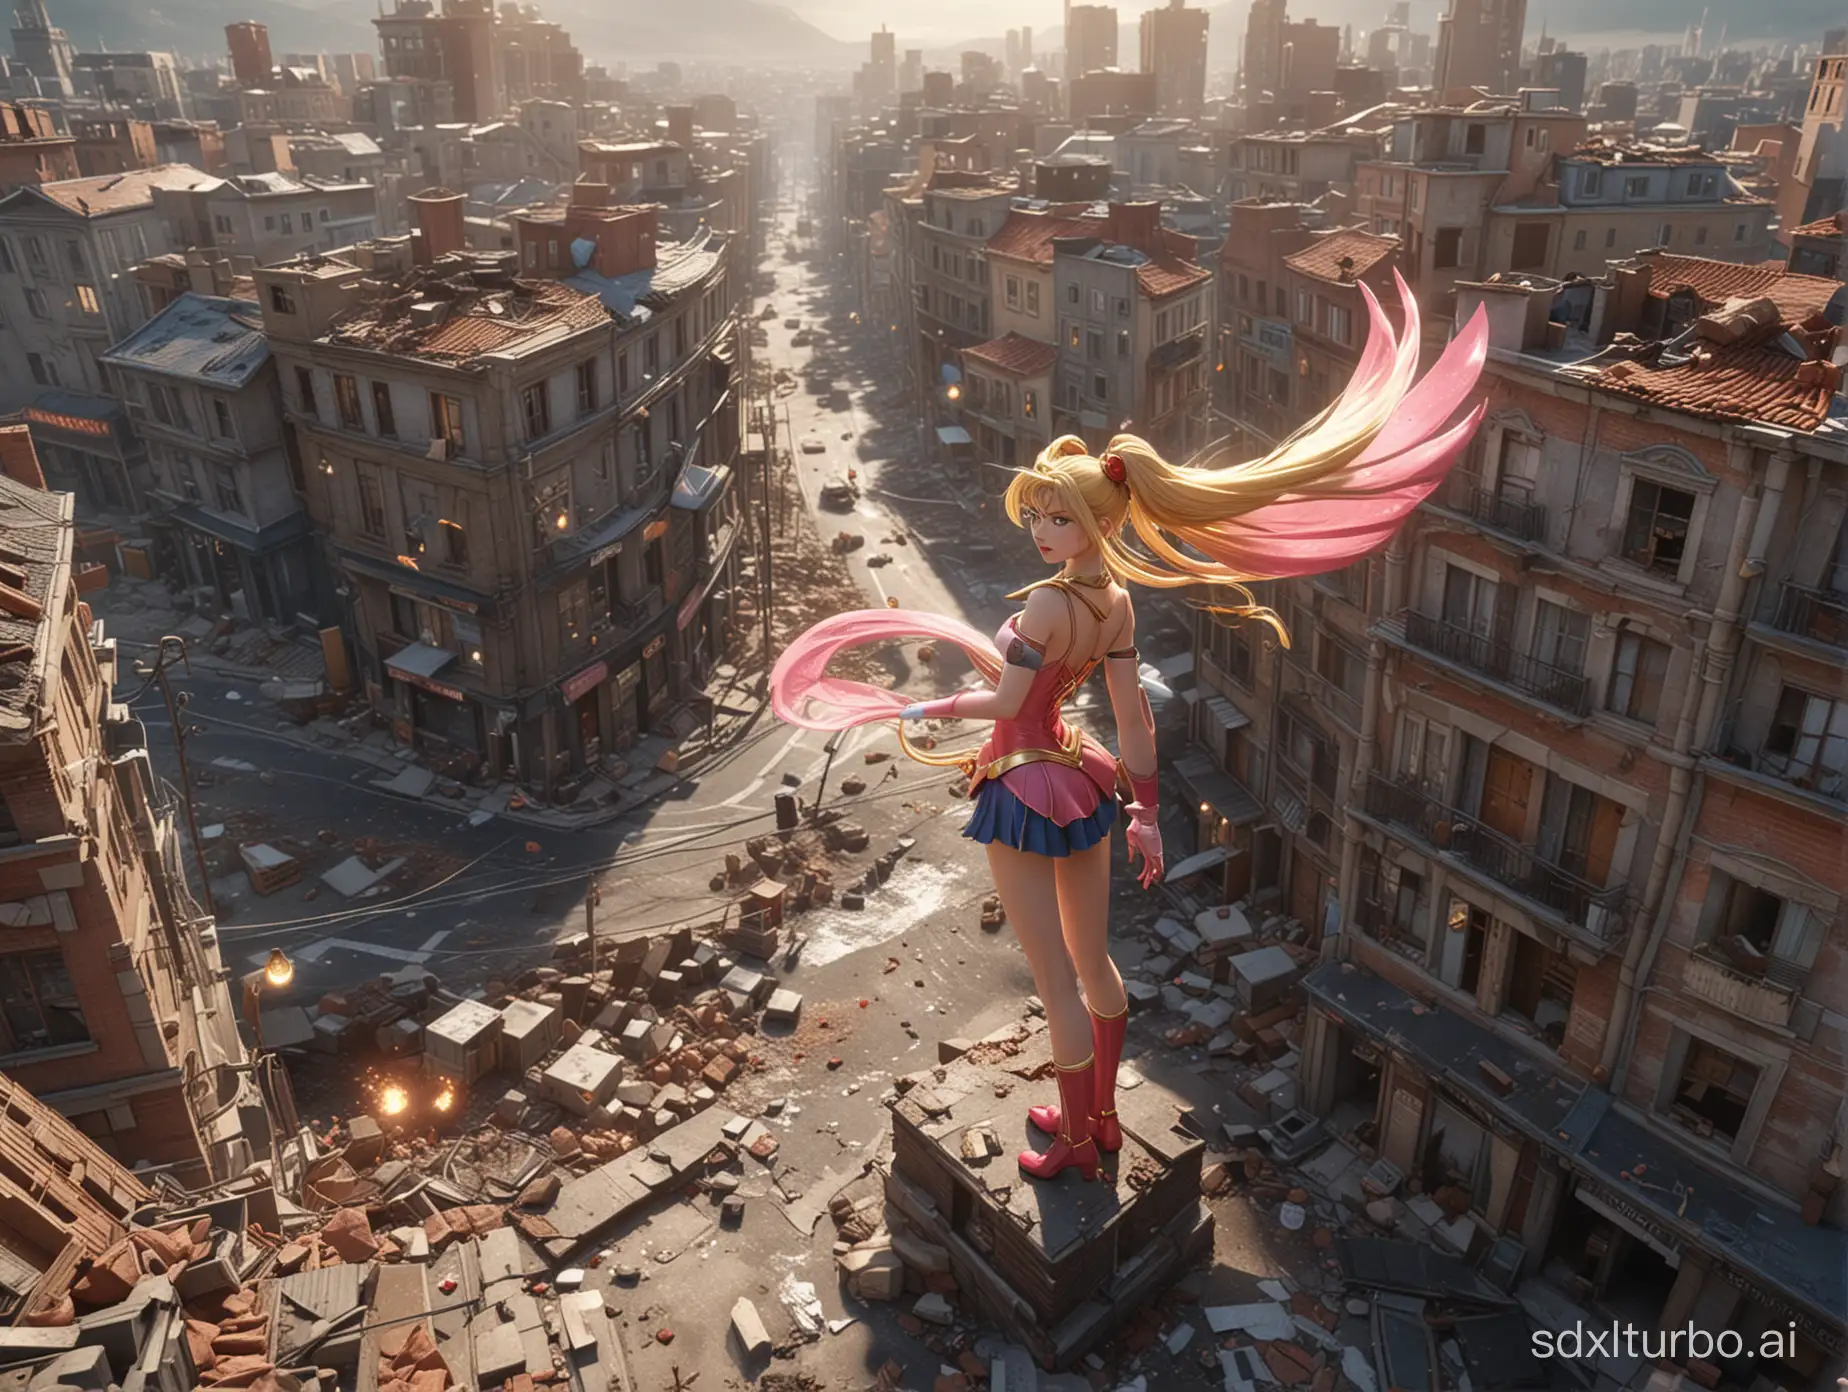 3D, V-Ray rendering, Surrealism, bird's-eye photography, the fictional scene is rendered in ultra-high definition, emphasizing depth of field and intricate details. A massive Sailormoon enters a town, destroying buildings. Natural light, natural textures, depth of field, HDR